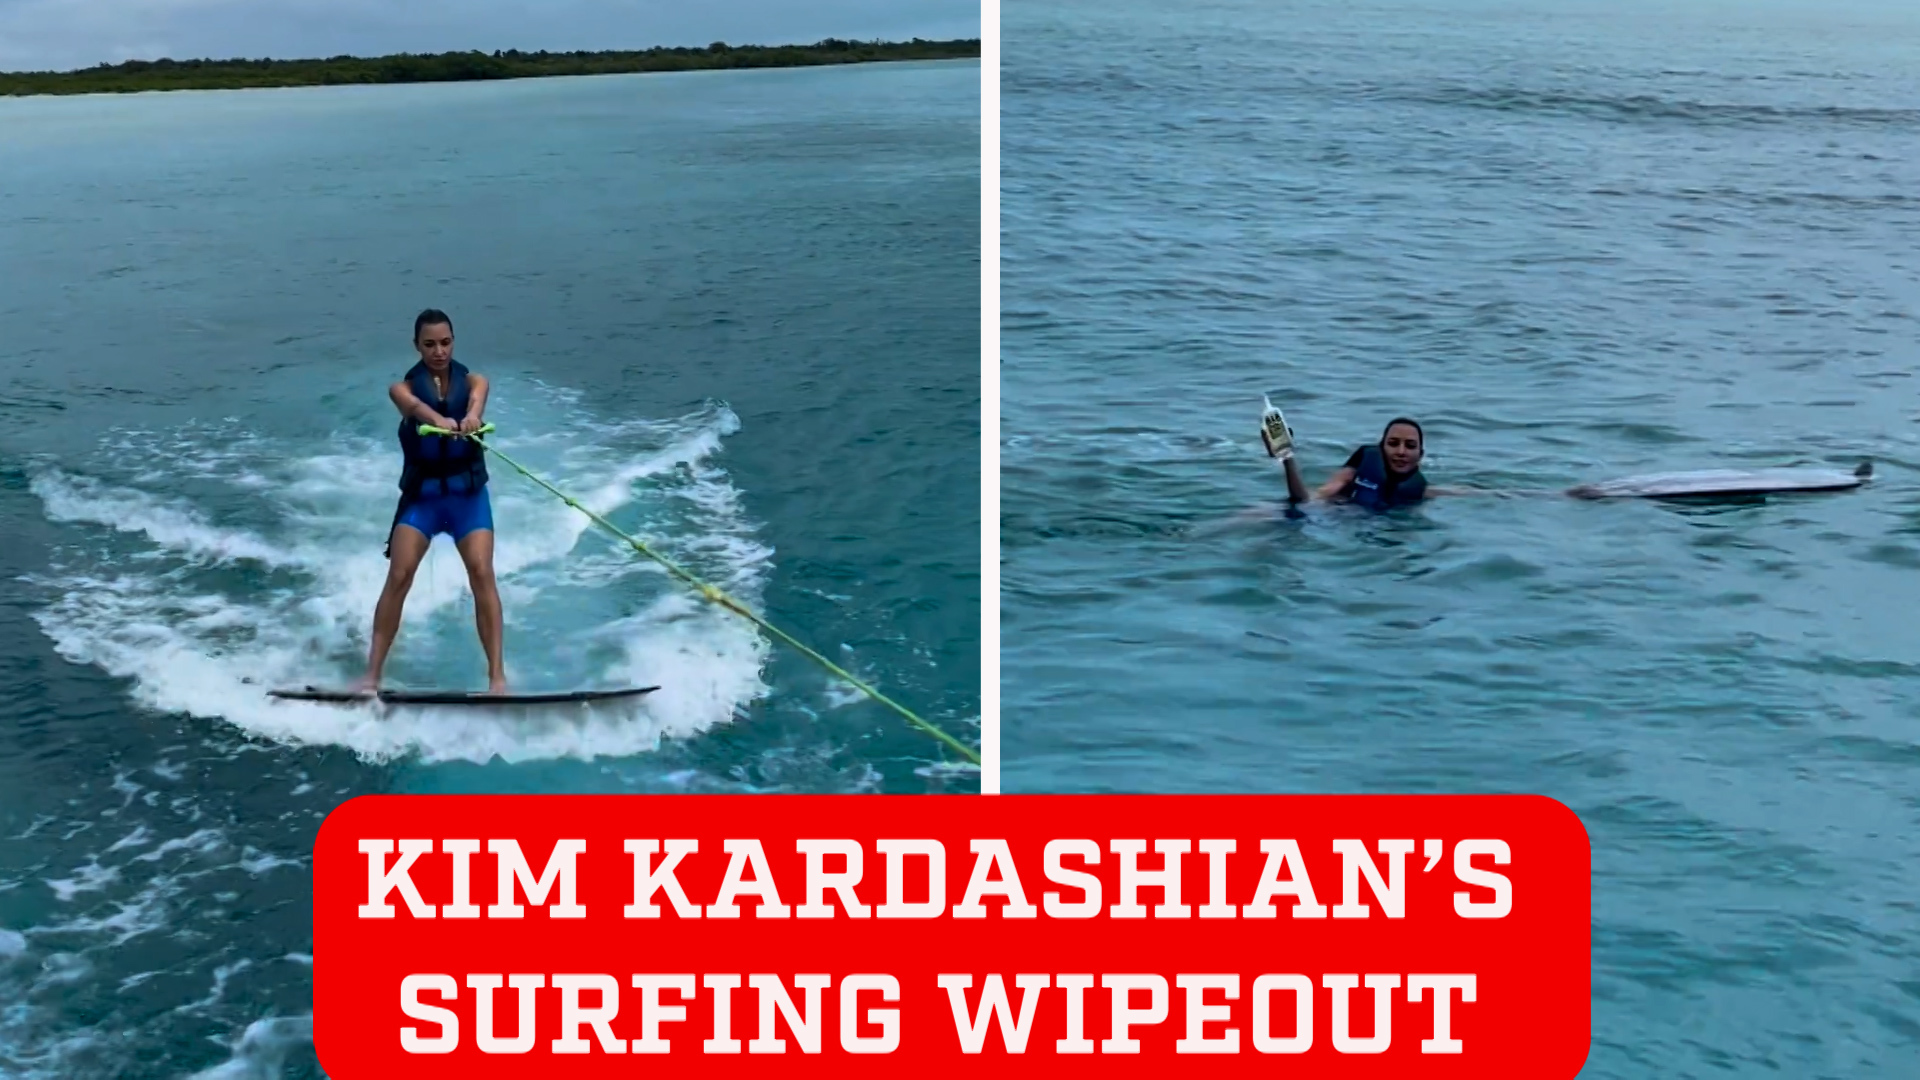 Kim Kardashian's viral surfing wipeout after 'downing' Kendall Jenner's tequila